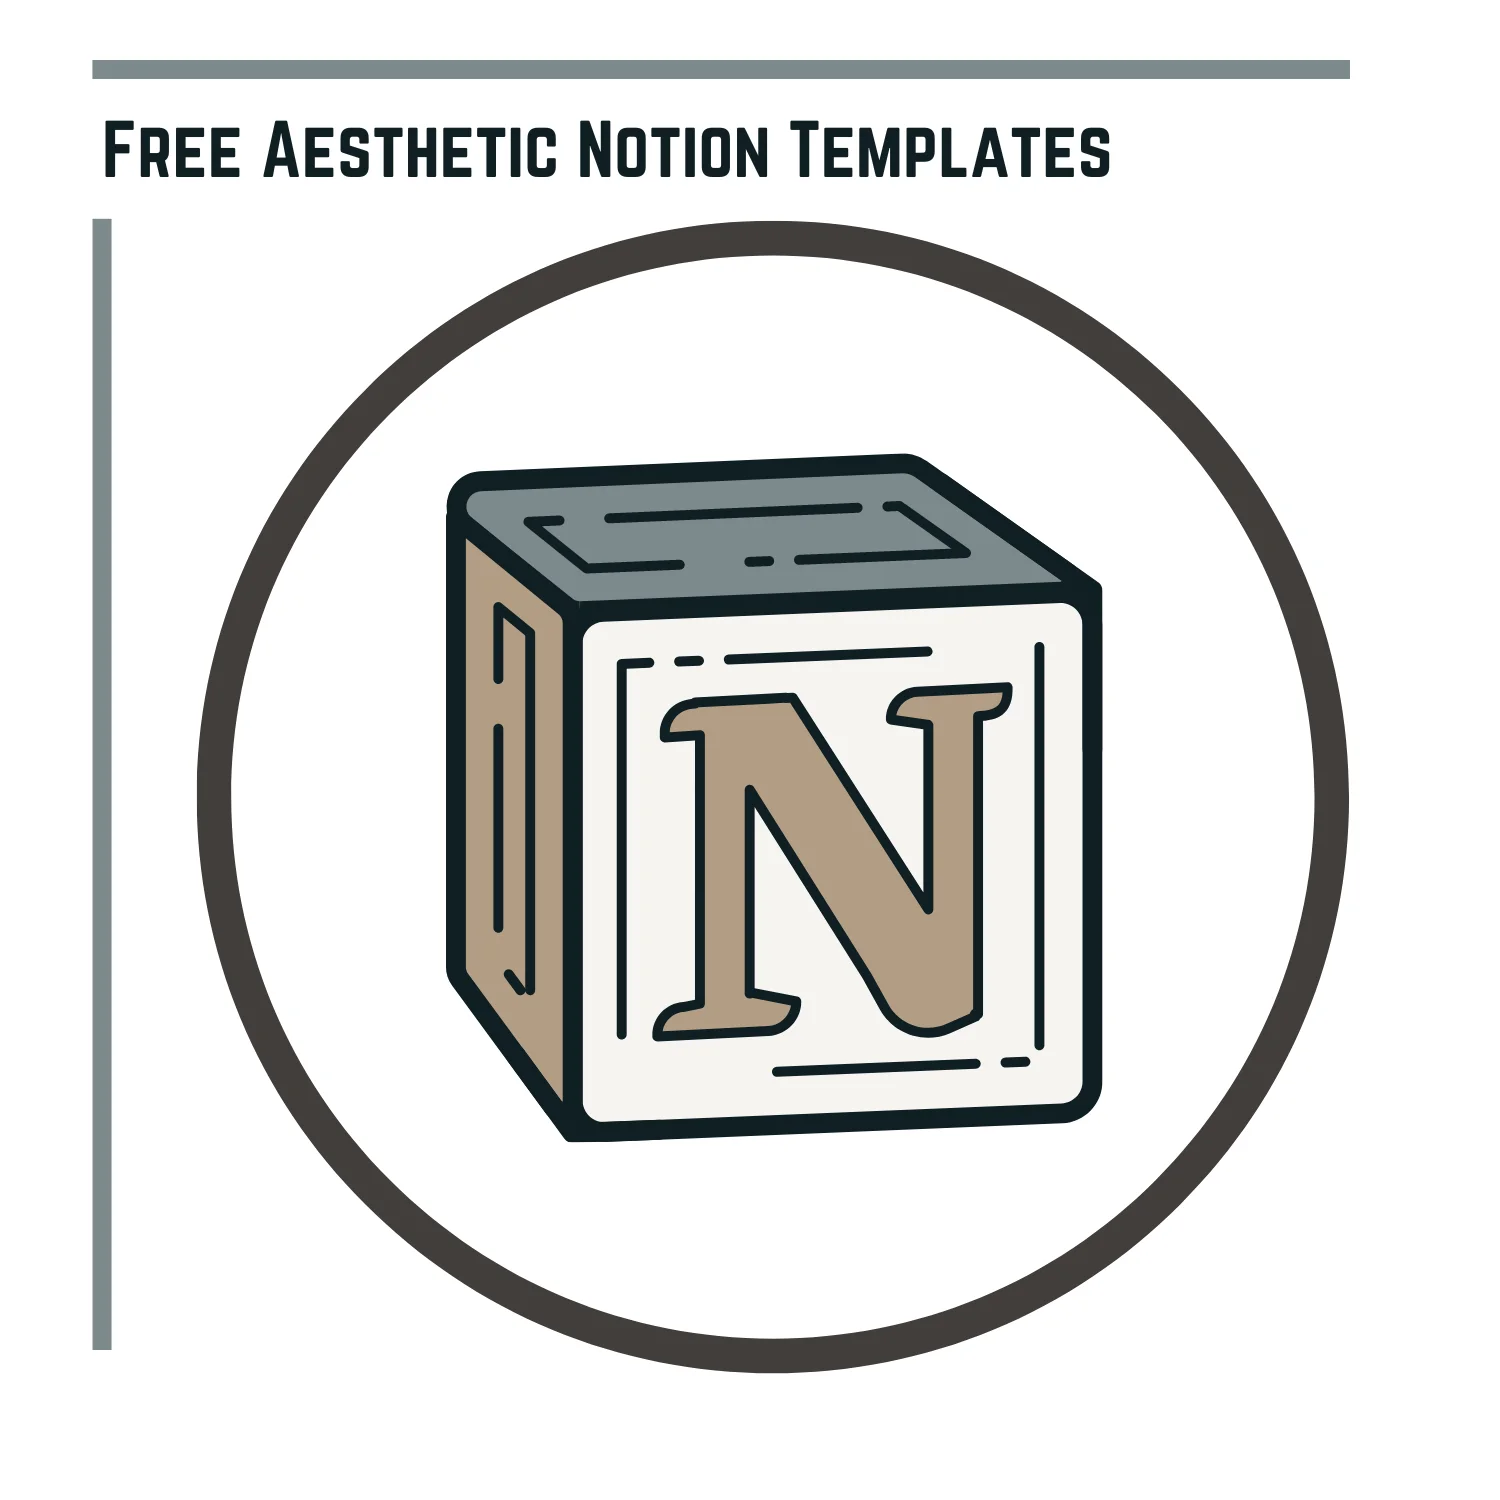 Aesthetic Notion Templates